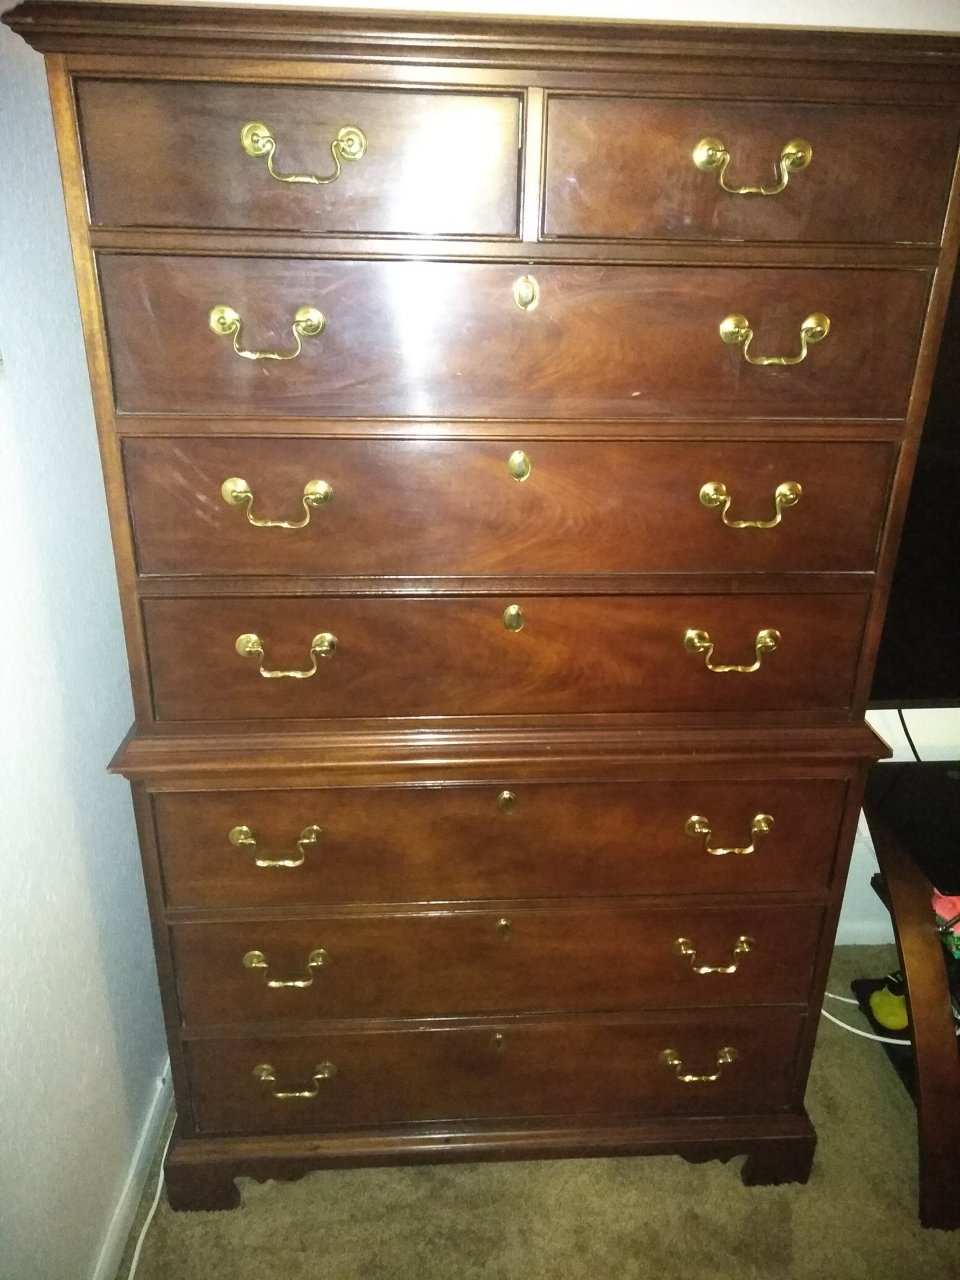 What Is This Thomasville Dresser Worth? | My Antique Furniture Collection